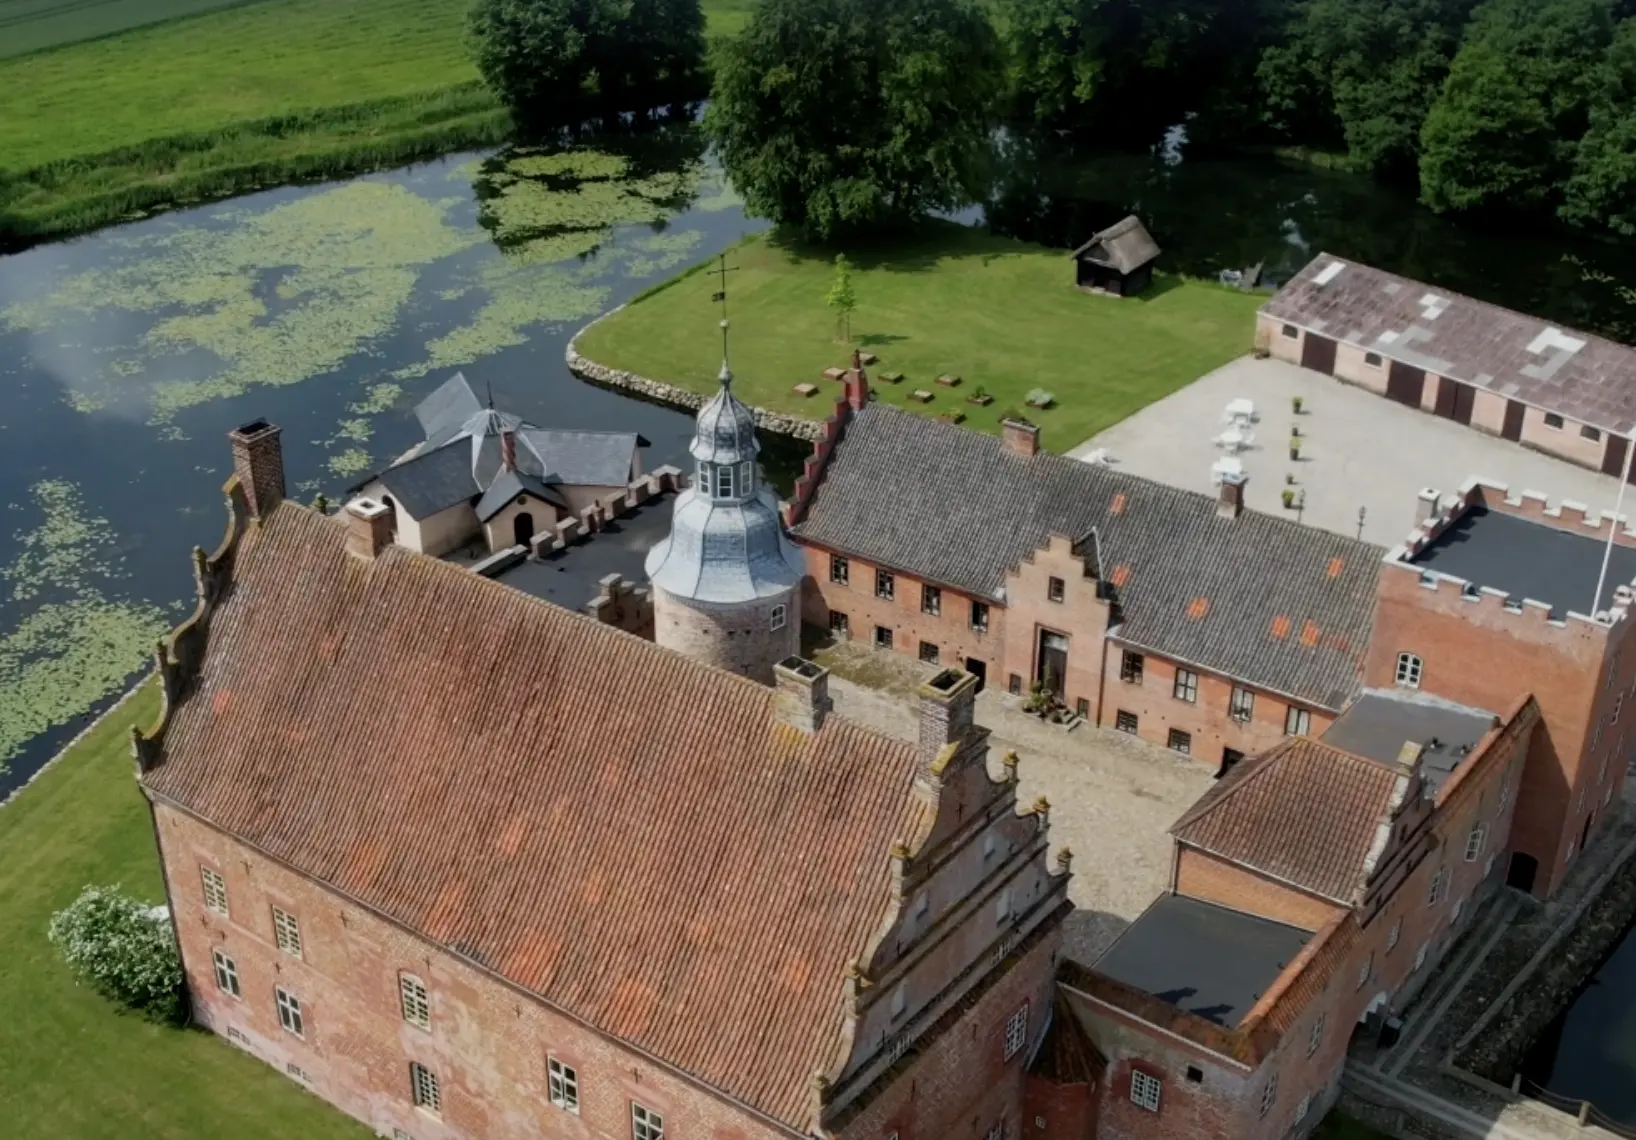 Aerial view of red brick castle compound next to green lawns and a pond, Broholm Castel Hotel in Denmark.